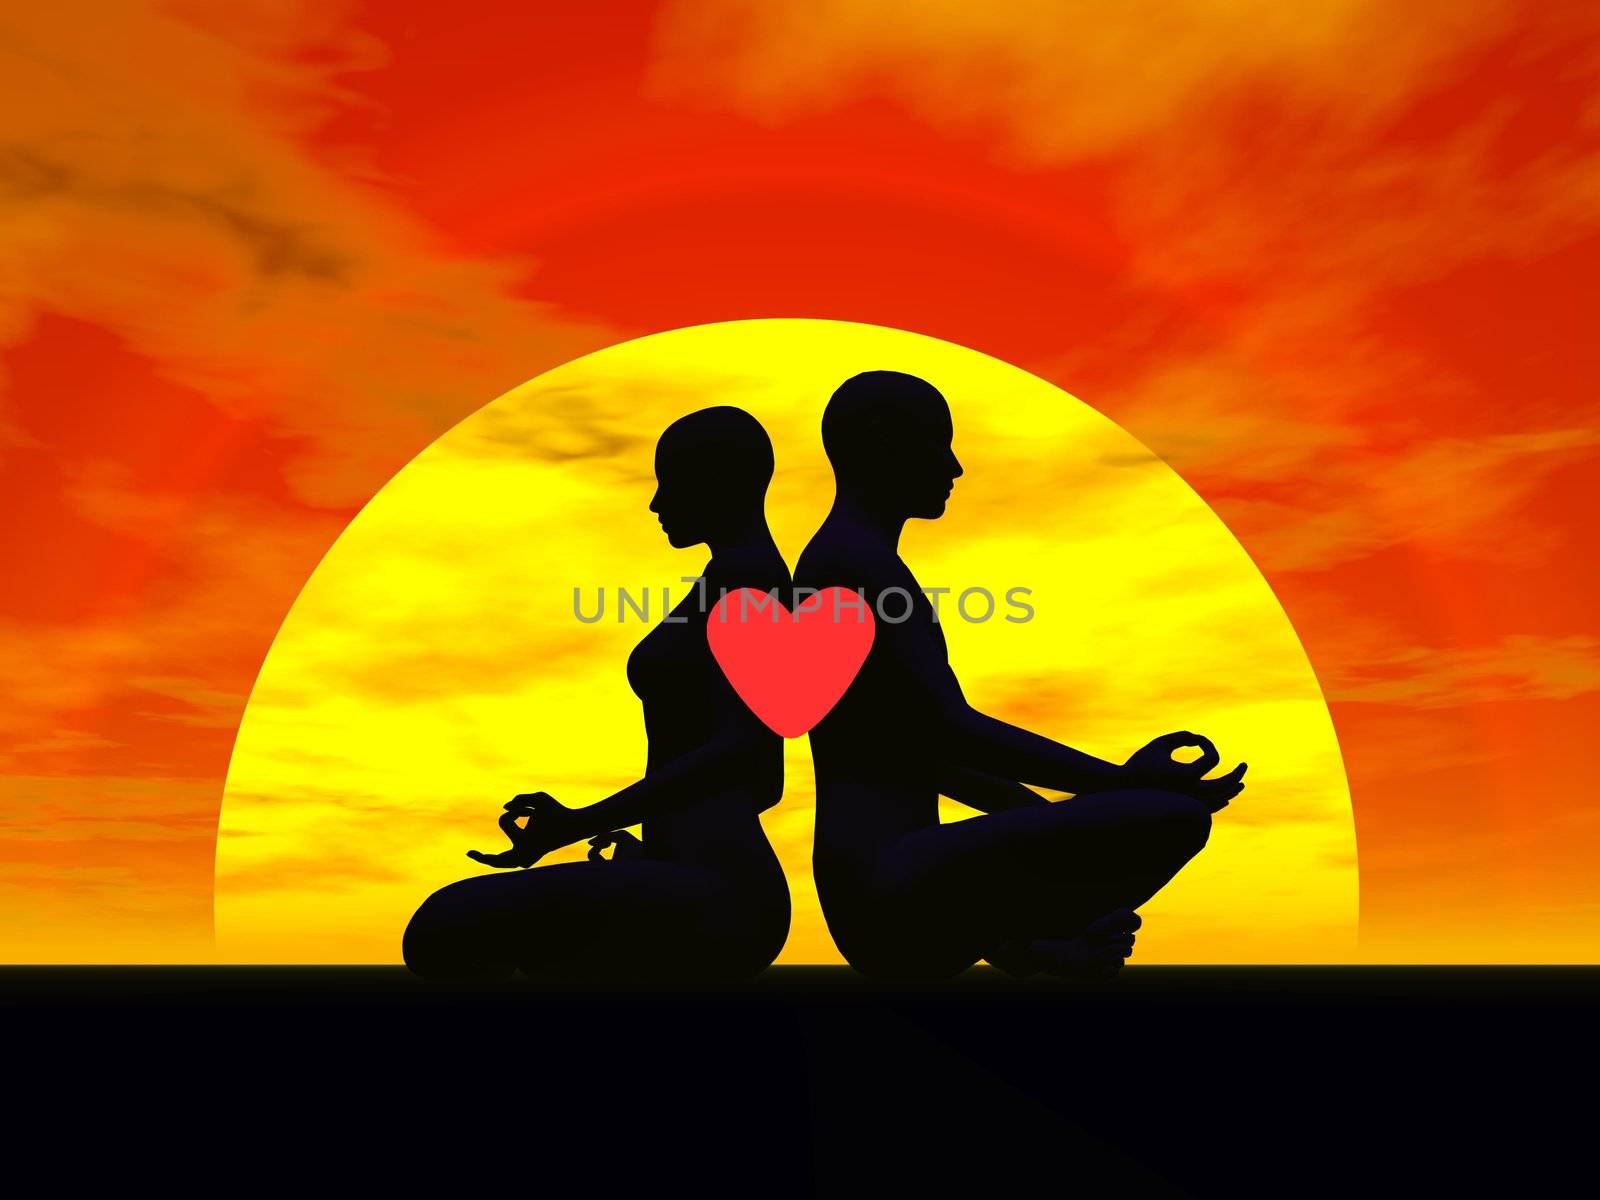 Shadow of man and woman back to back in lotus meditating posture by sunset, one heart upon them